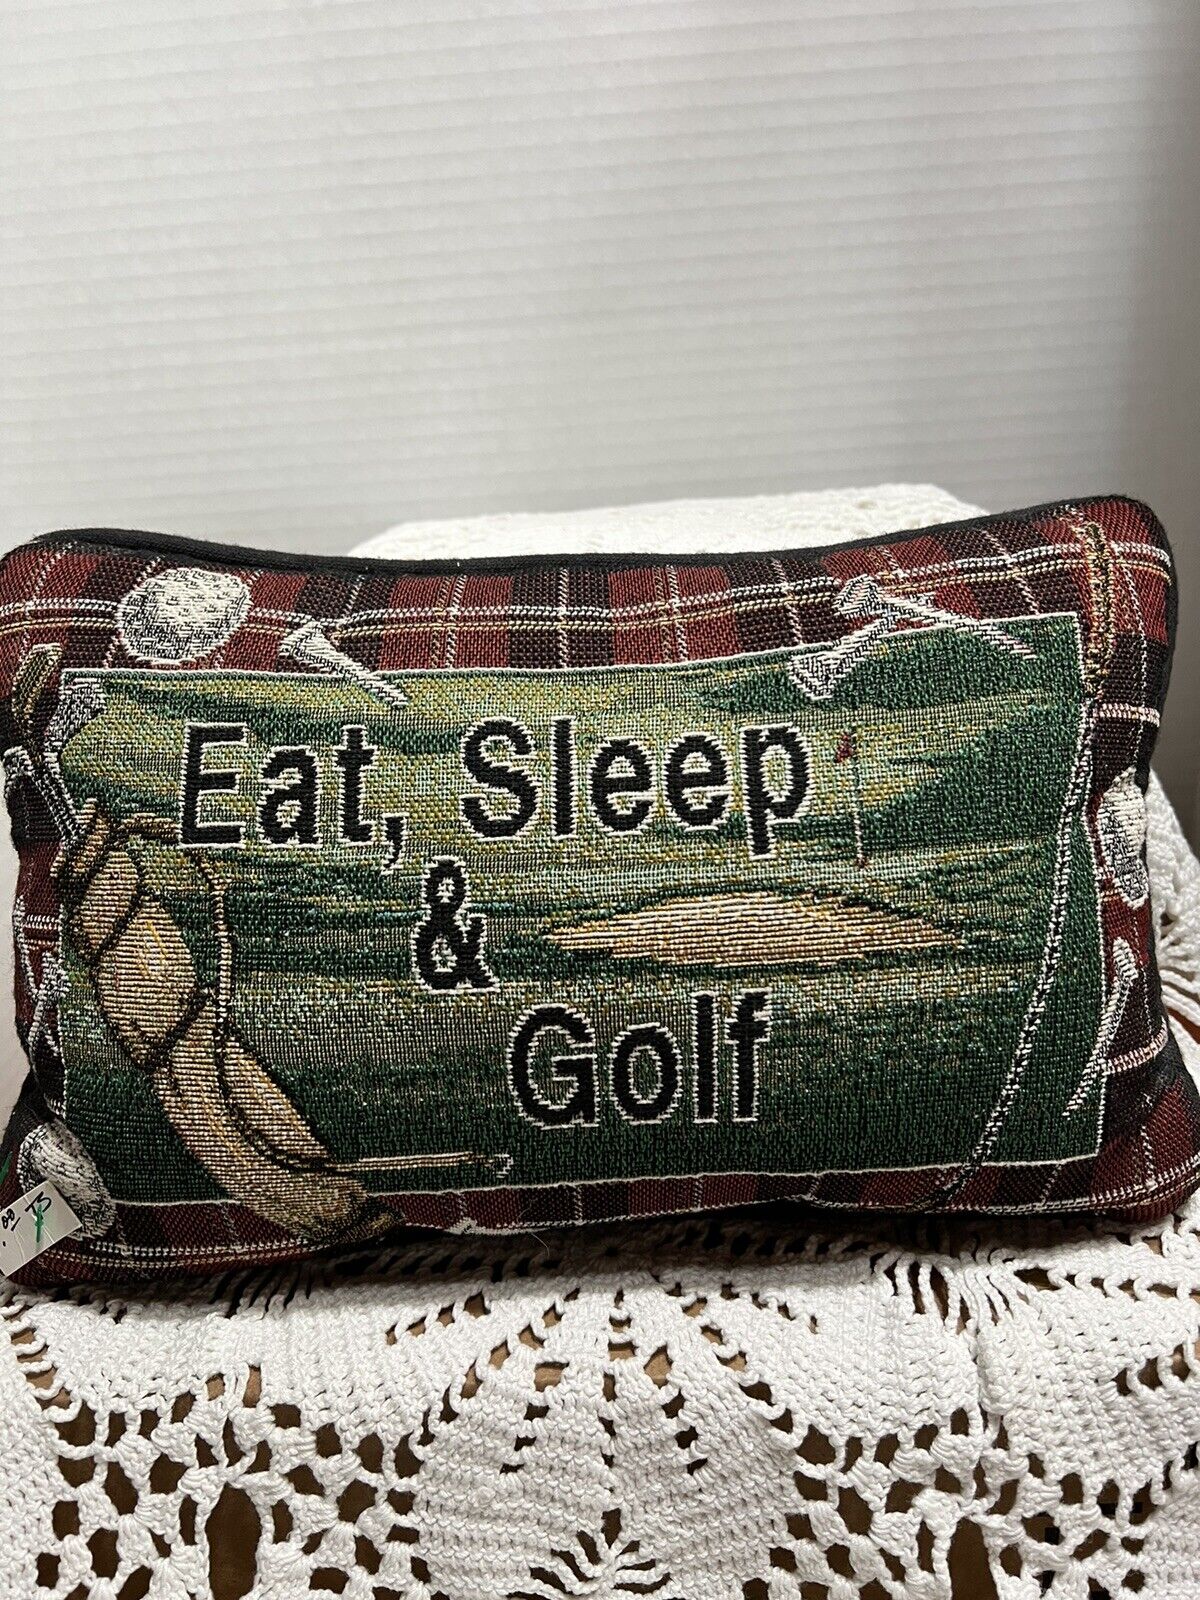 New Eat Sleep & Golf Tapestry Throw Accent Pillow 12"x8" Made In Usa